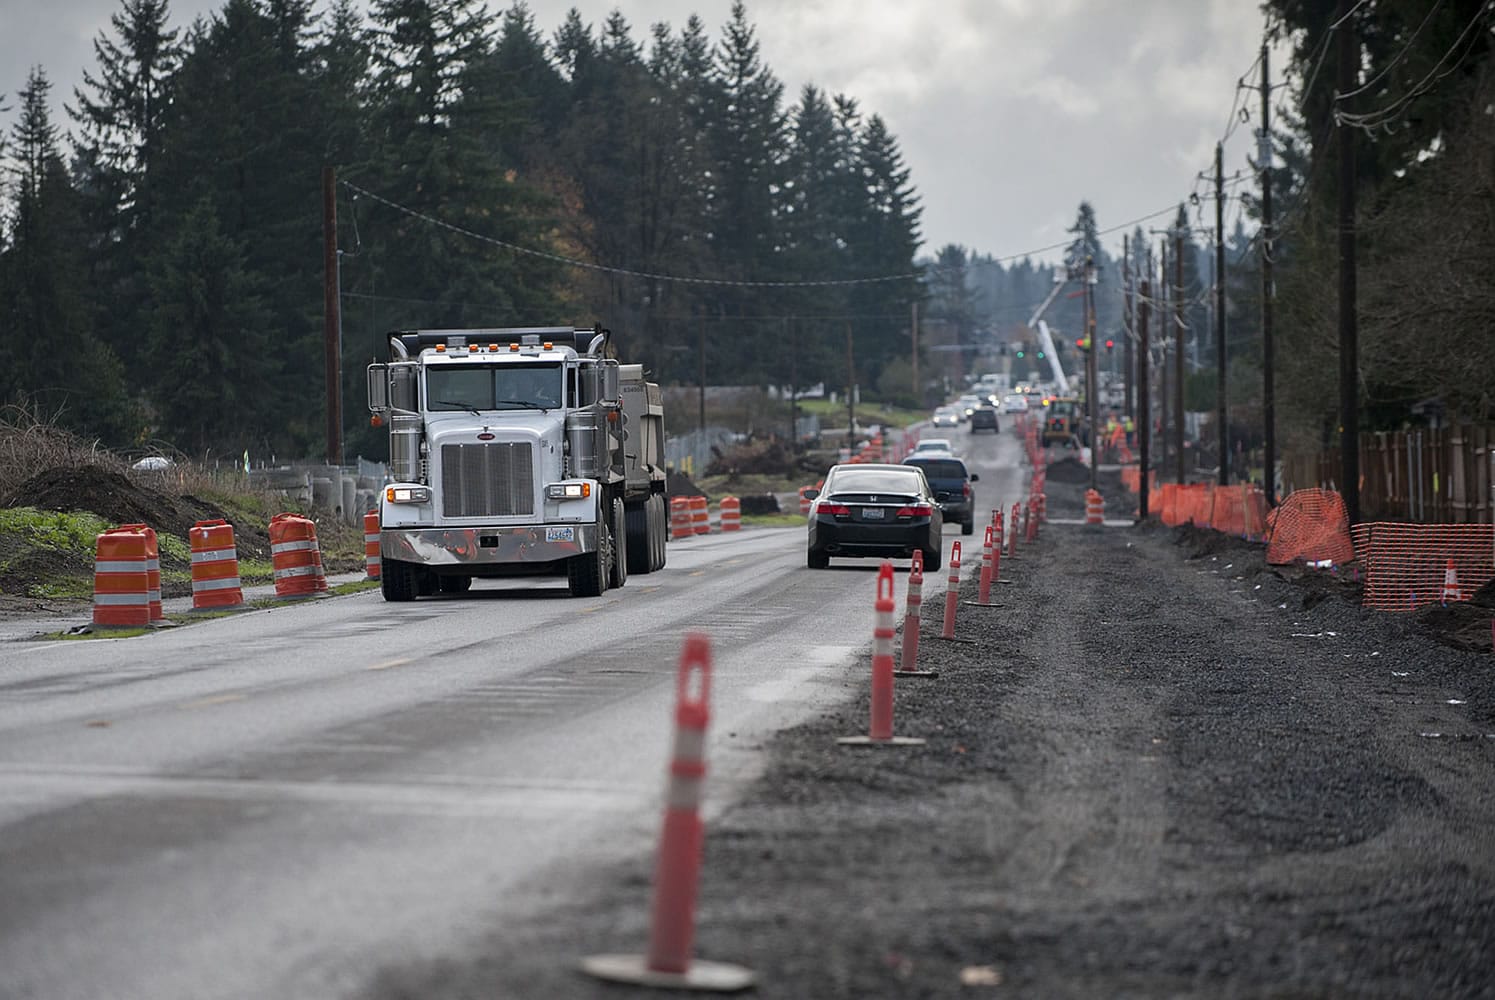 Motorists navigate past construction barriers the afternoon of Nov. 24 along Northeast 94th Avenue in Vancouver. Construction is ongoing to widen and improve the road, and is slated to be finished next fall.